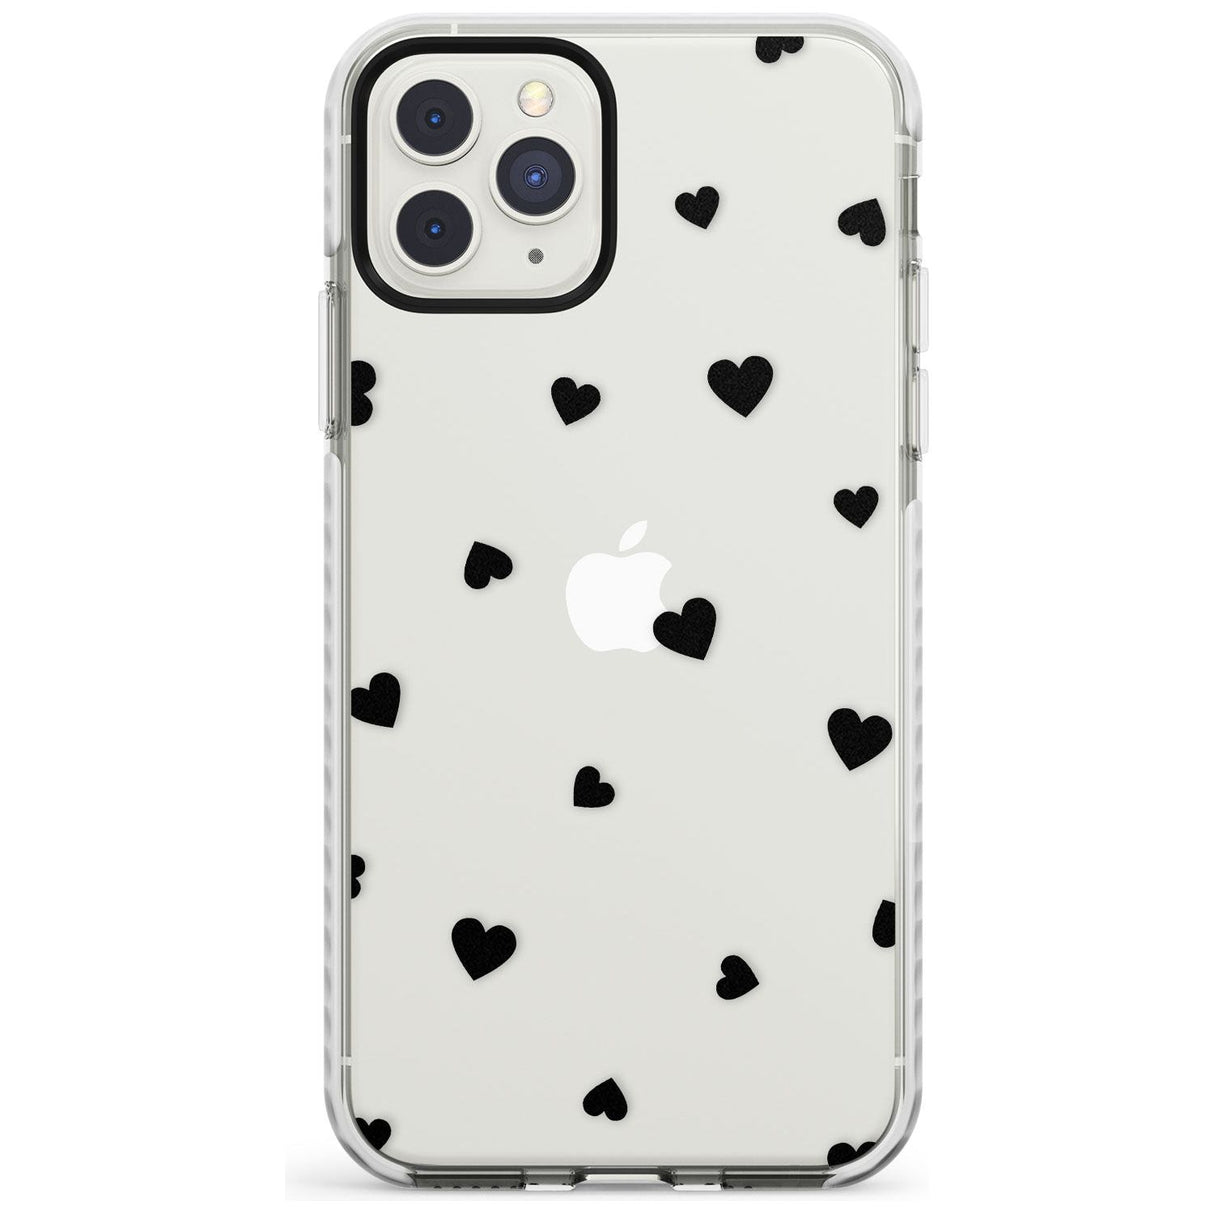 Black Hearts Pattern Impact Phone Case for iPhone 11 Pro Max